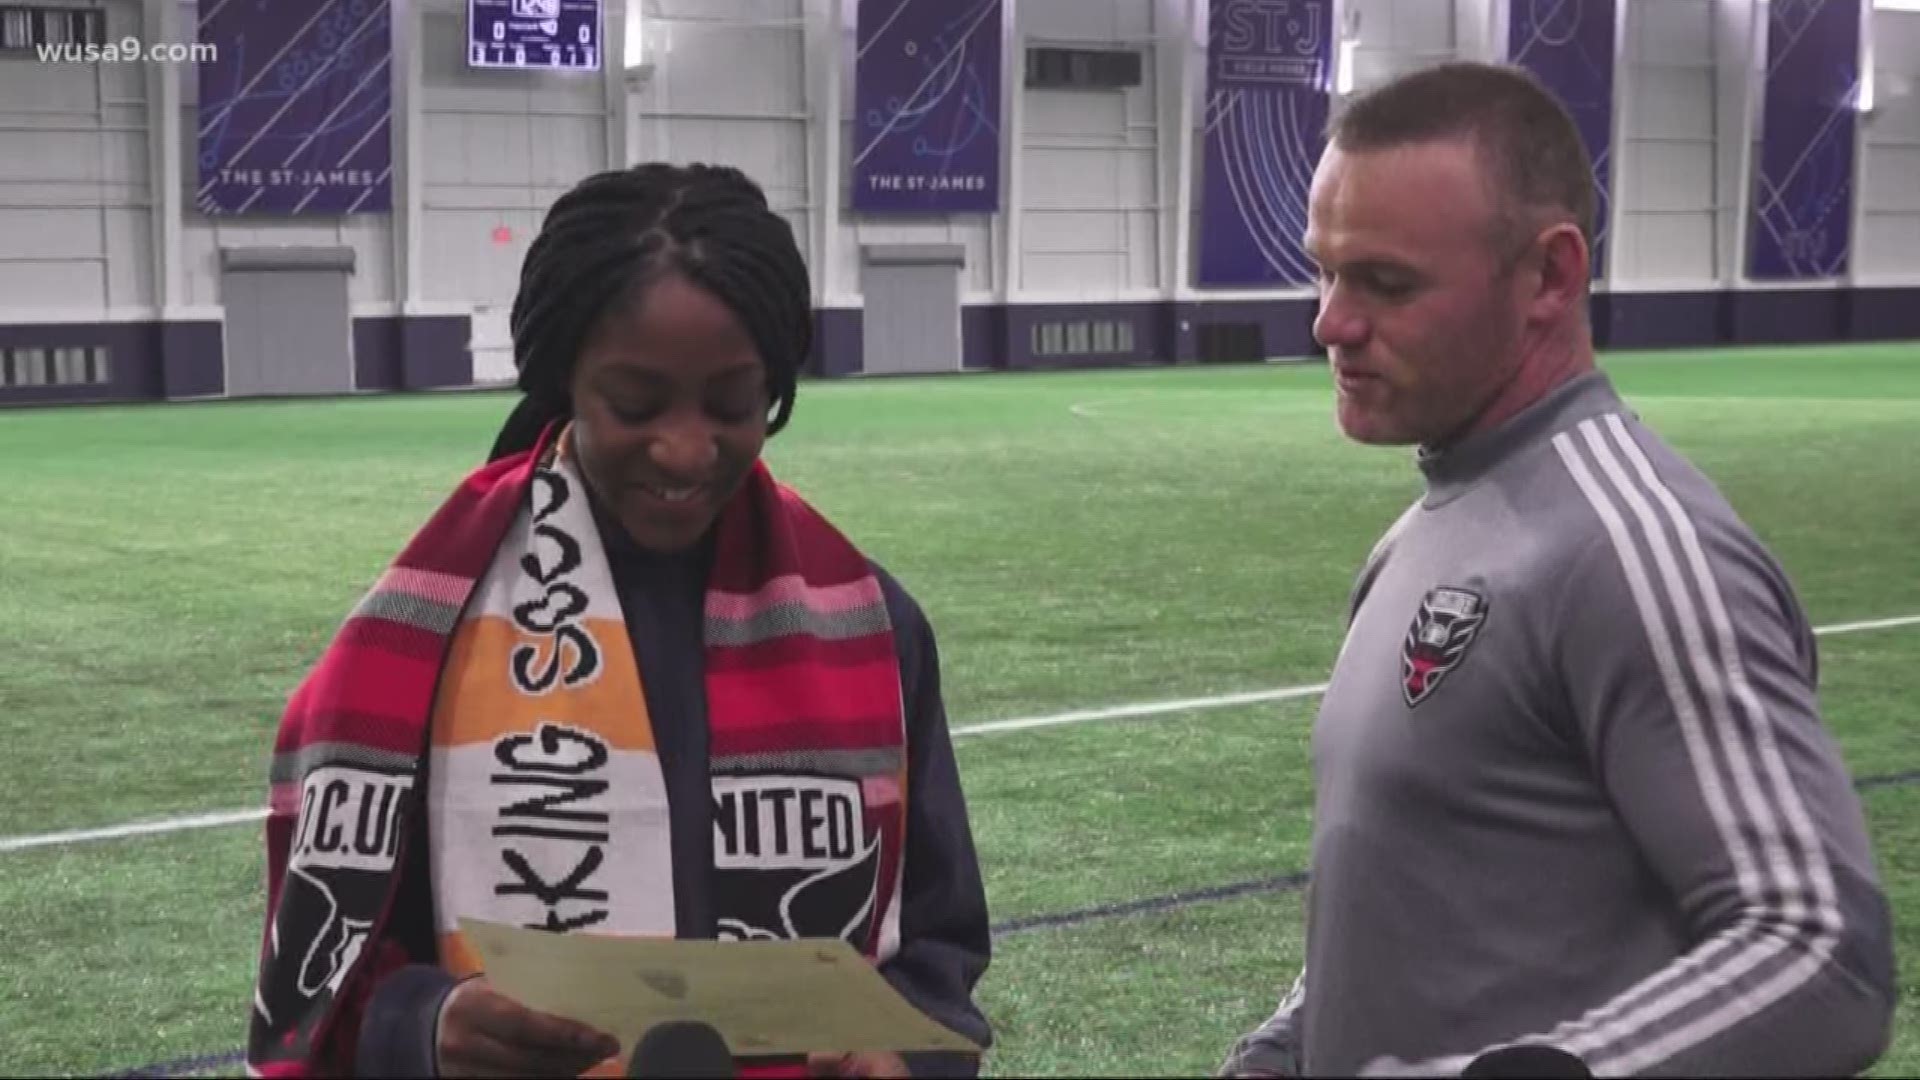 Wayne Rooney and D.C. United surprised a fan battling cancer with tickets to see Manchester United